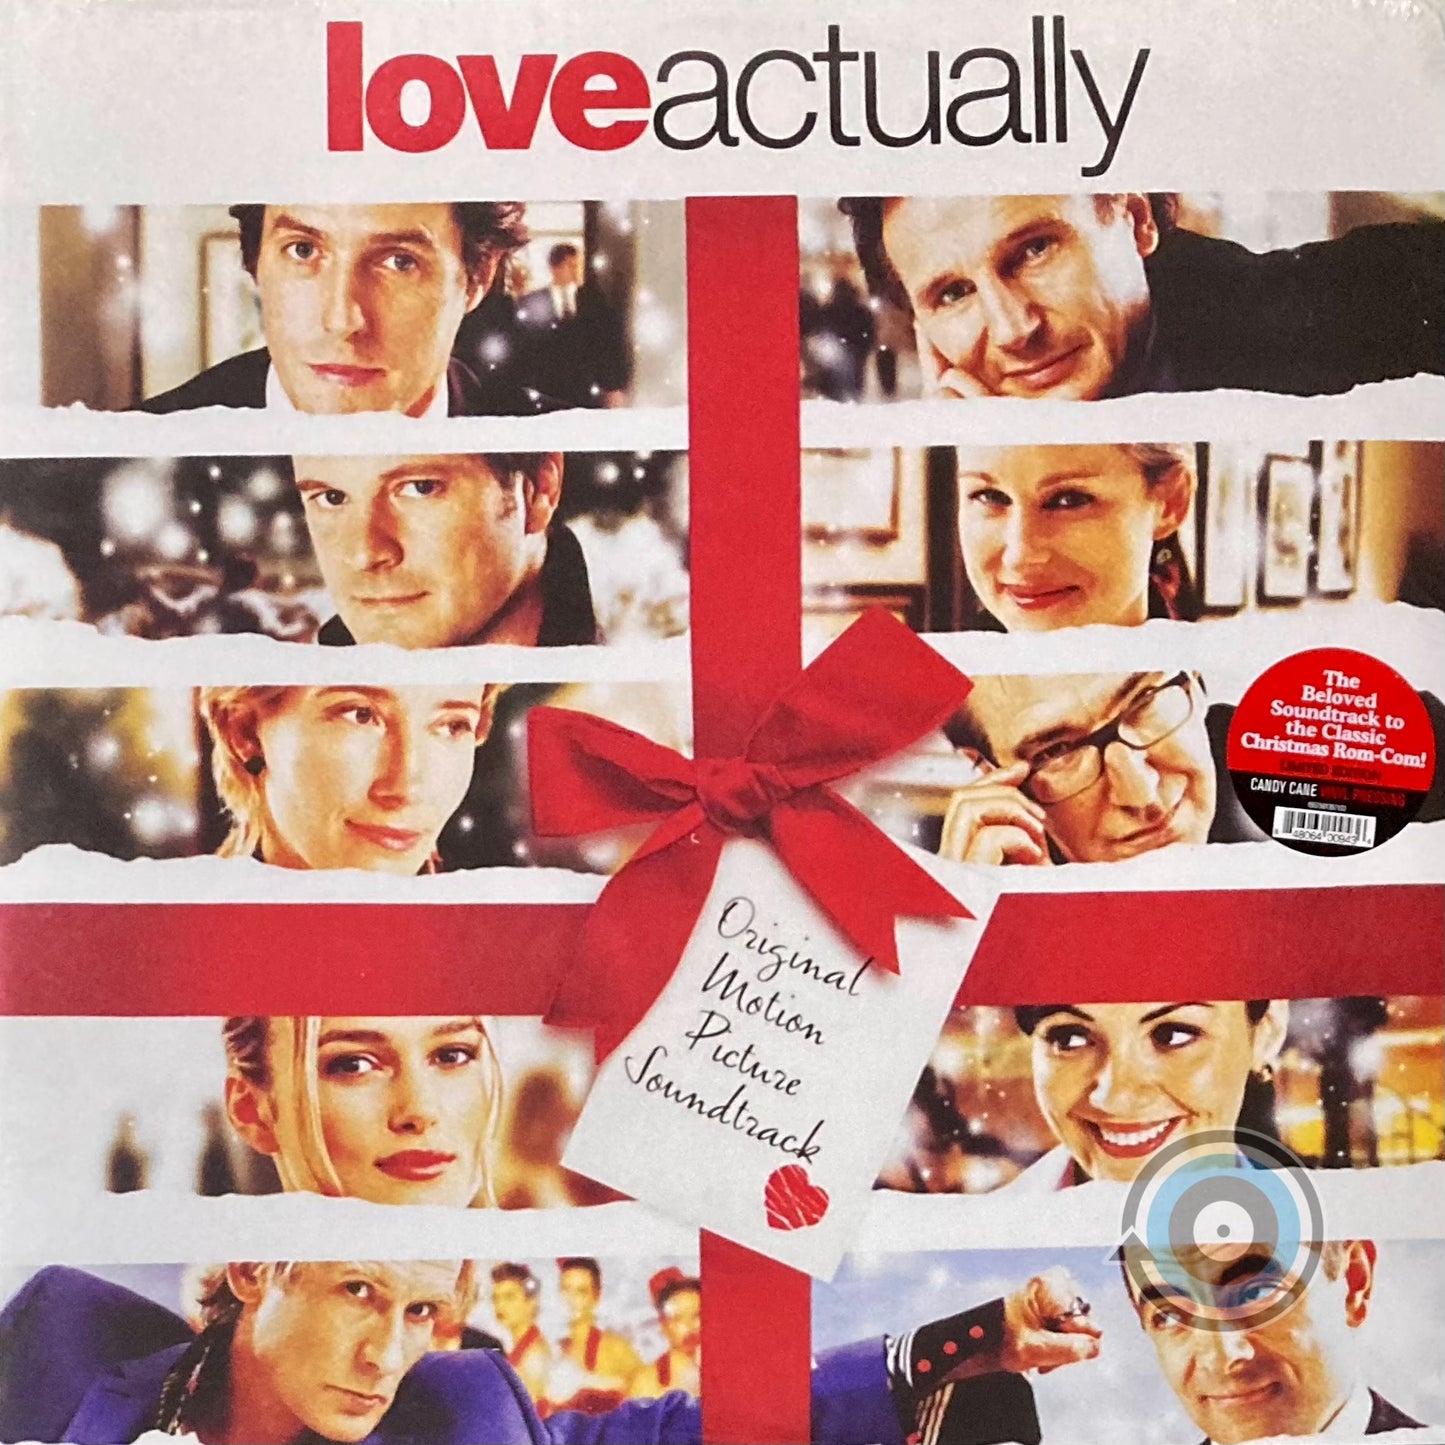 Love Actually: The Original Motion Picture Soundtrack - Various Artists (Limited Edition) 2-LP (Sealed)